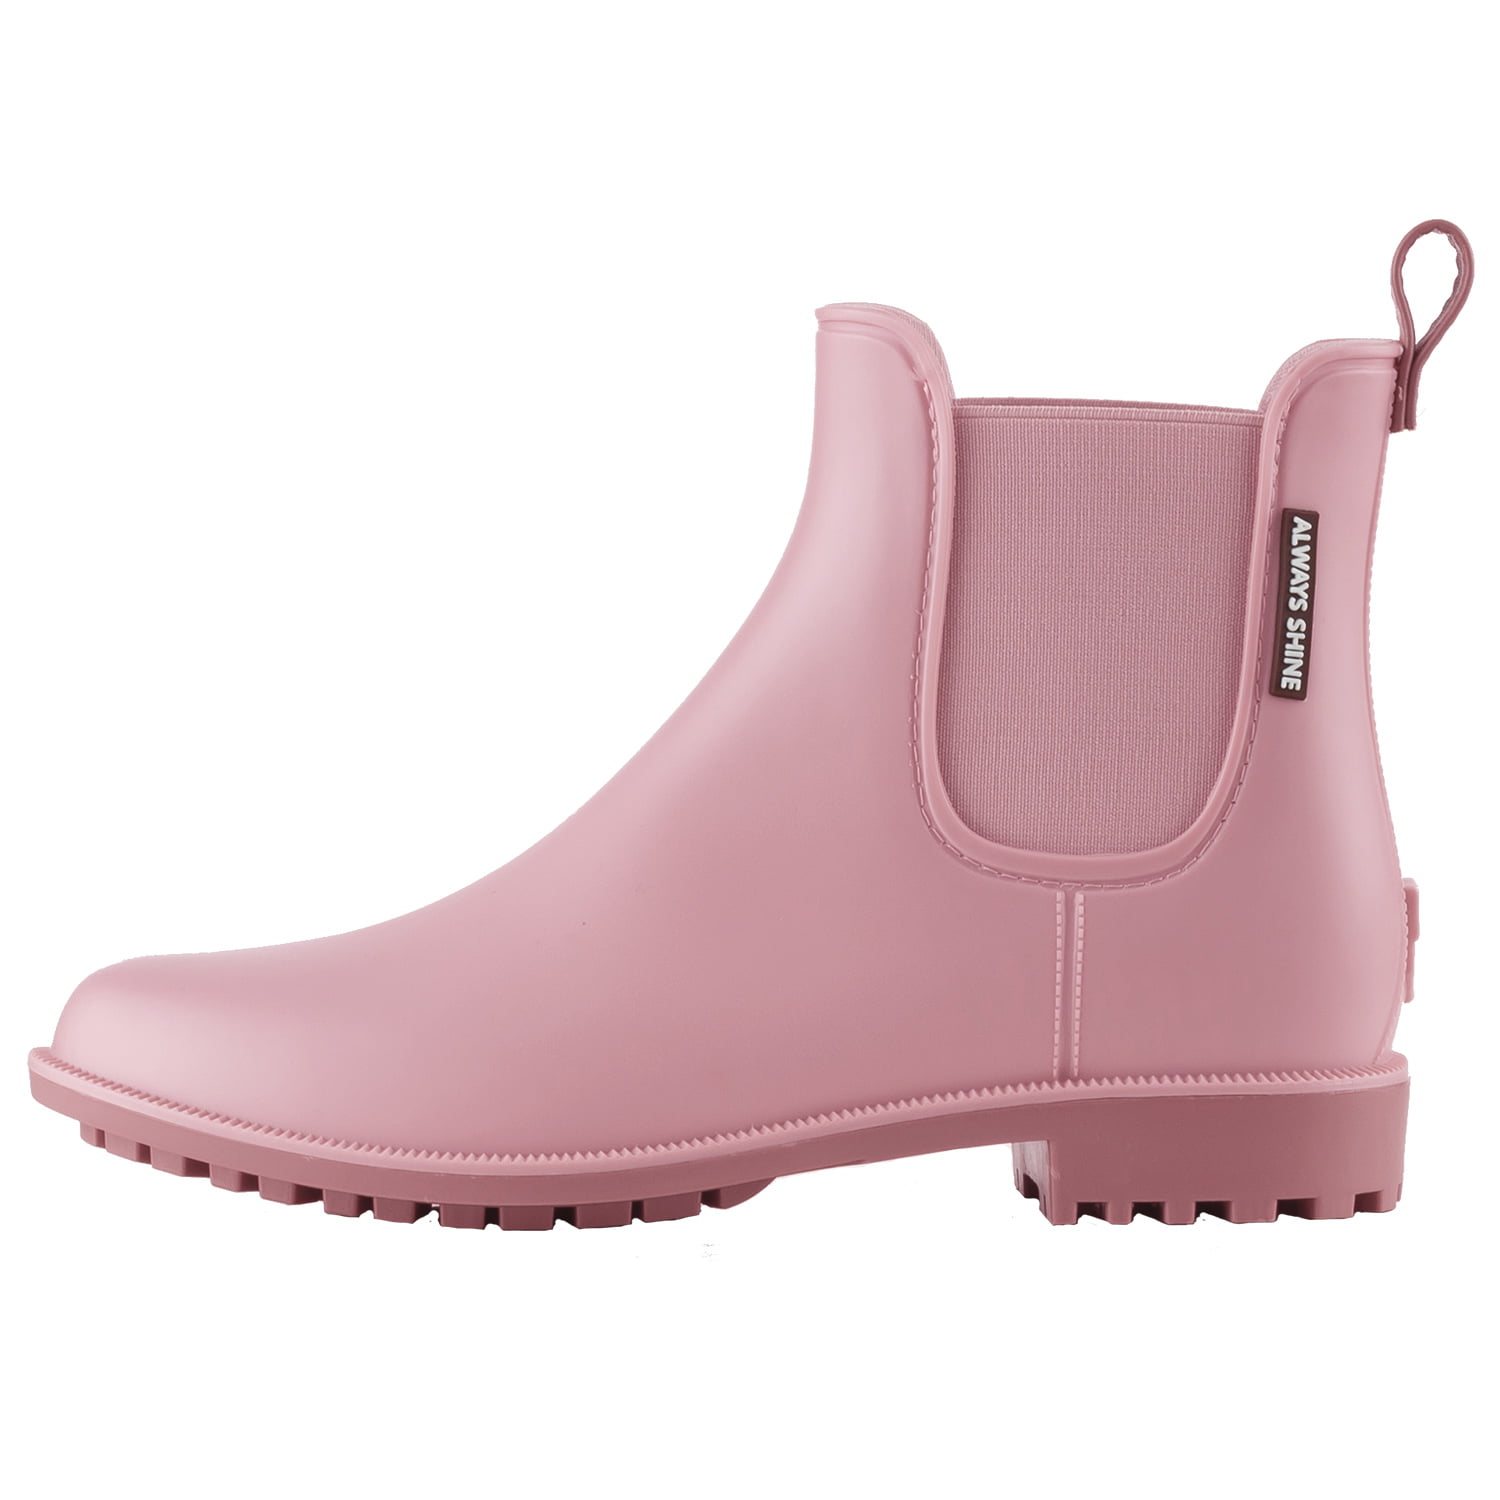 Garden Shoes for Outdoor with Comfortable Insole Women Fashion Rain Boots,Waterproof Tall rain Boots and Anti-Slipping Rubber Rainboots for Ladies